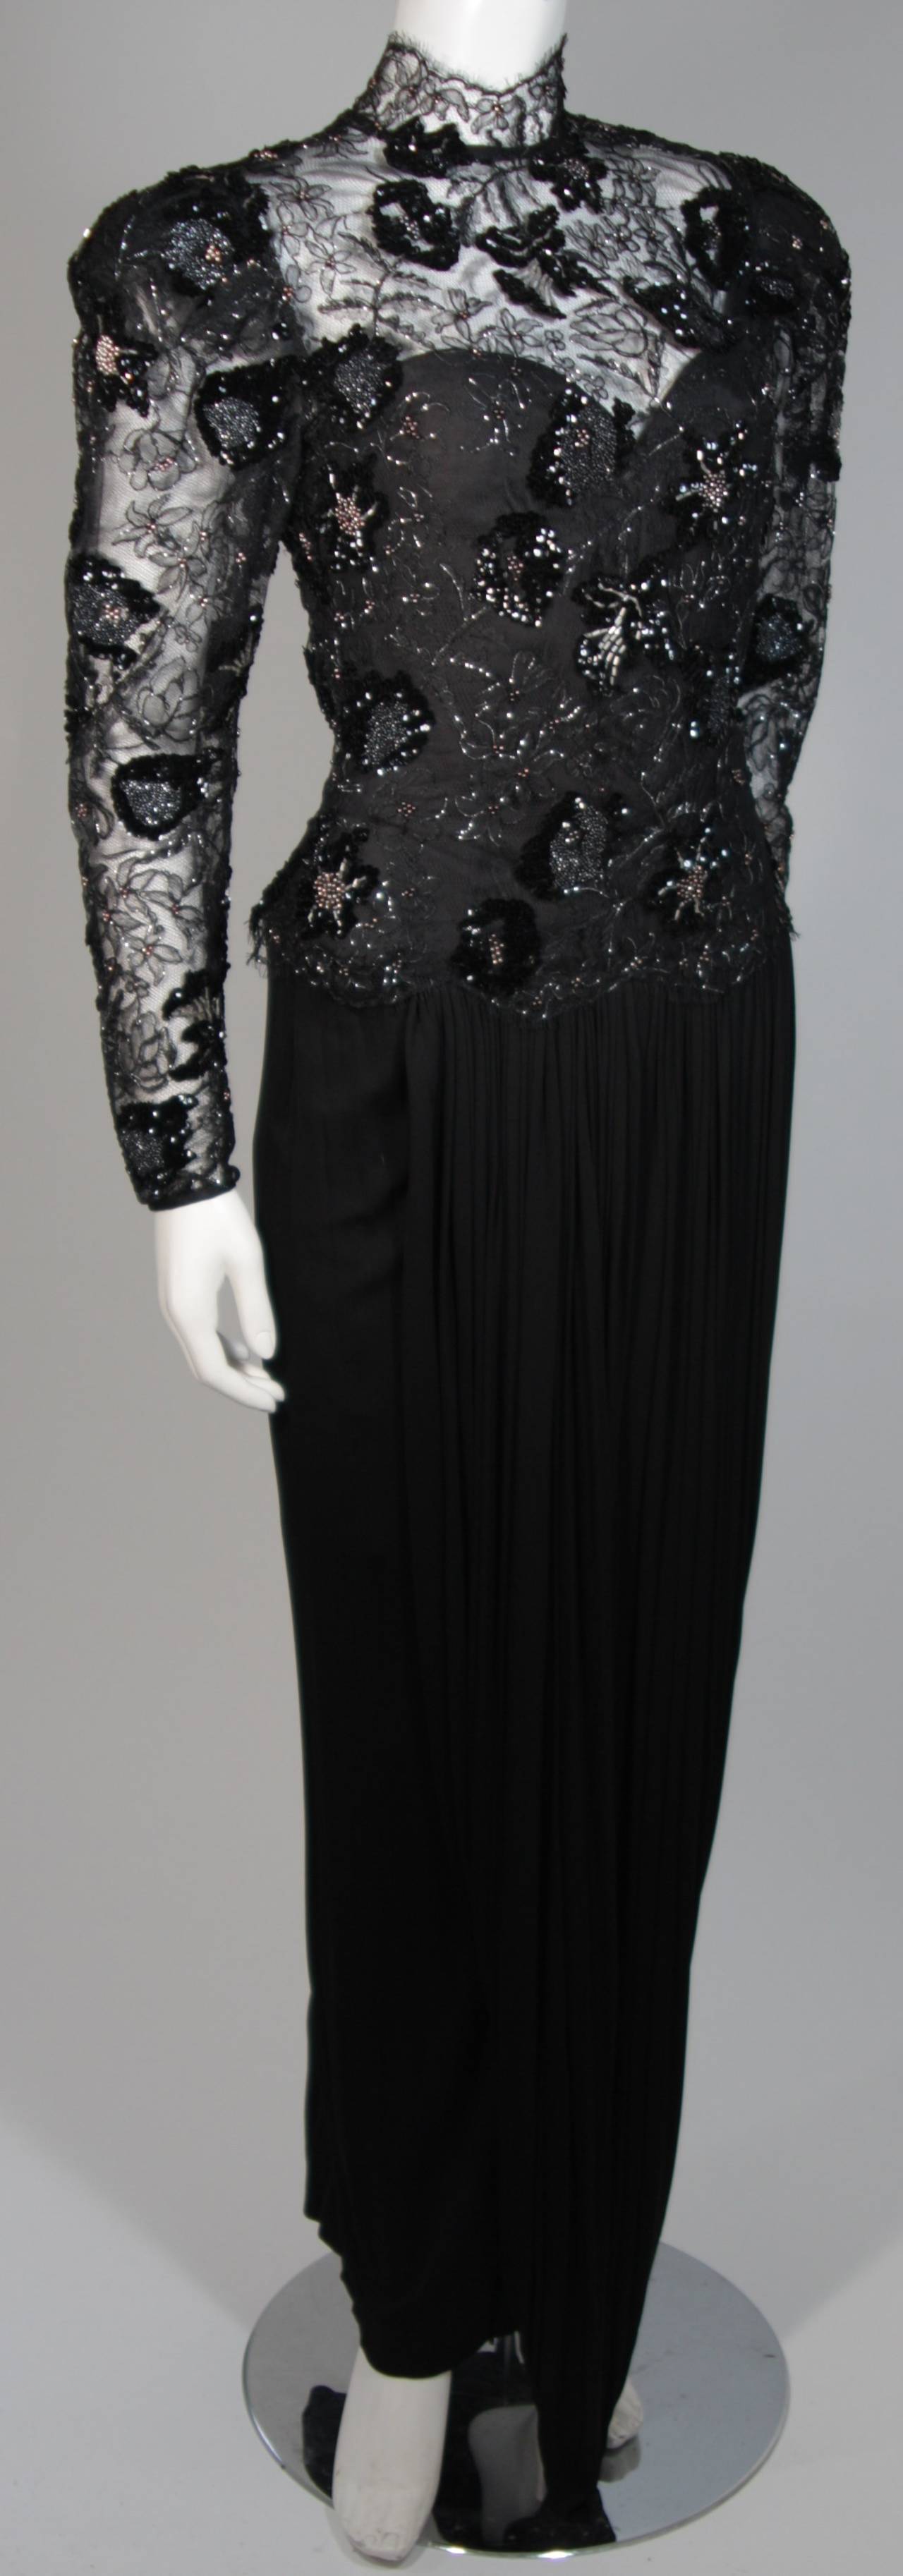 This Vicky Tiel gown is composed of a black sequin black lace with a draped jersey skirt. The bodice features long sleeves and a scallop edge mandarin style collar. The bodice features boning for structure and there is a center back zipper closure